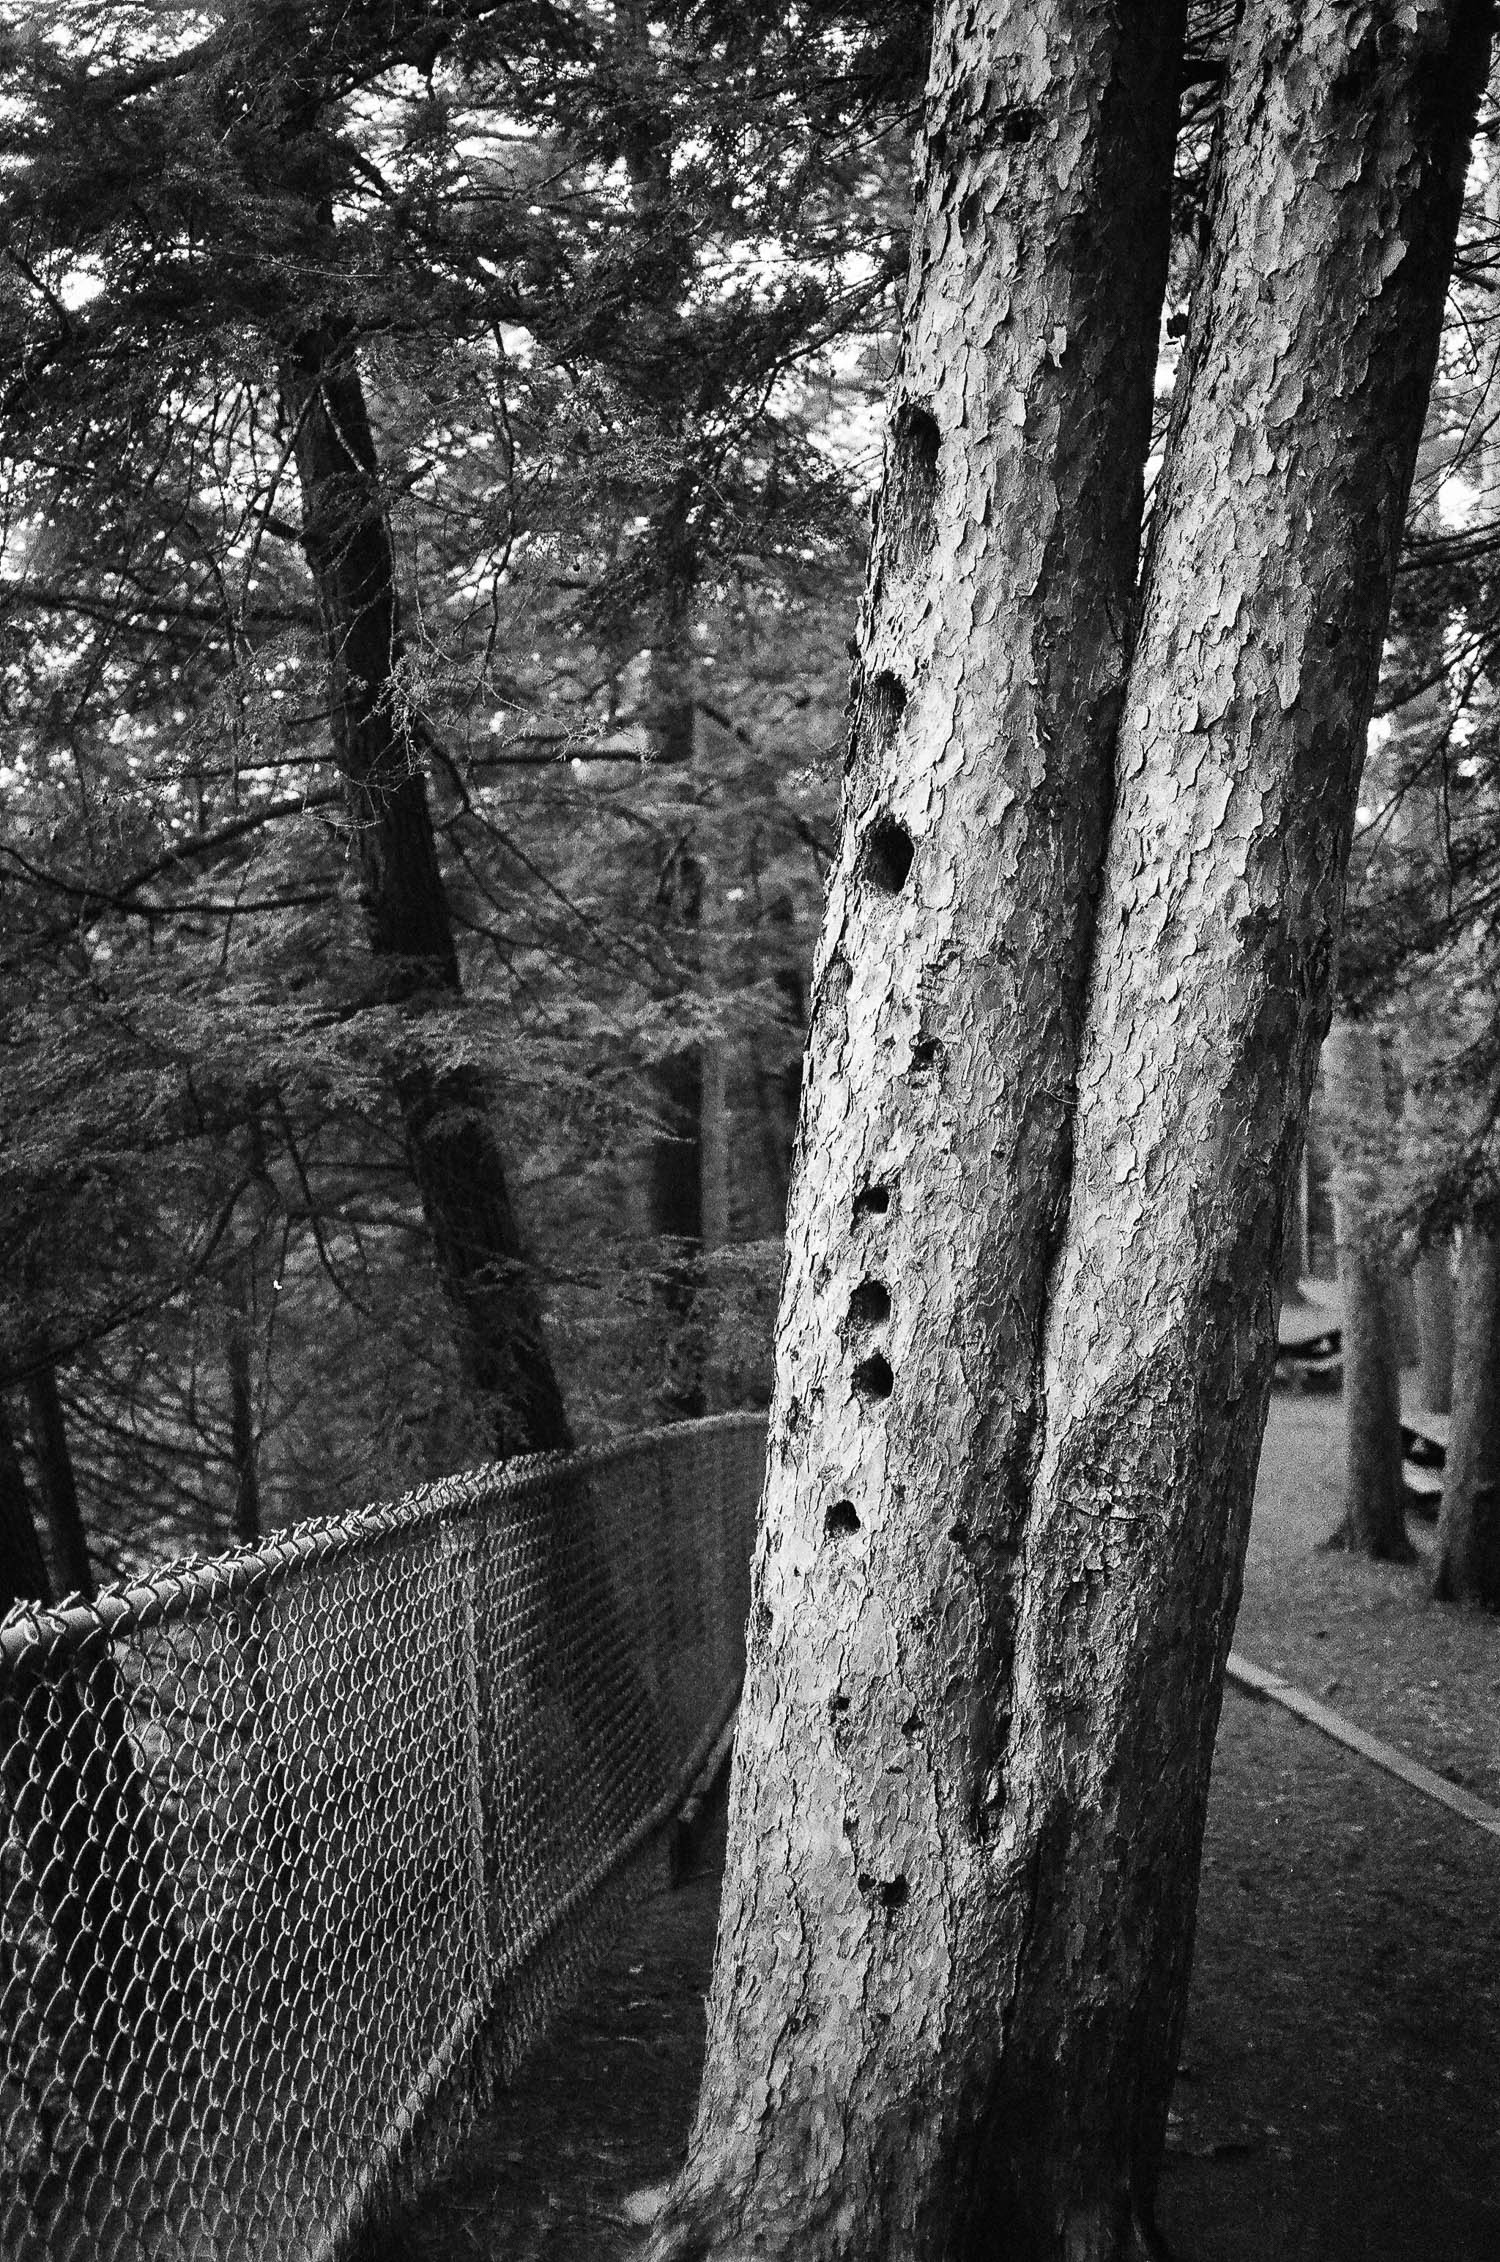 A tree riddled with holes from a woodpecker